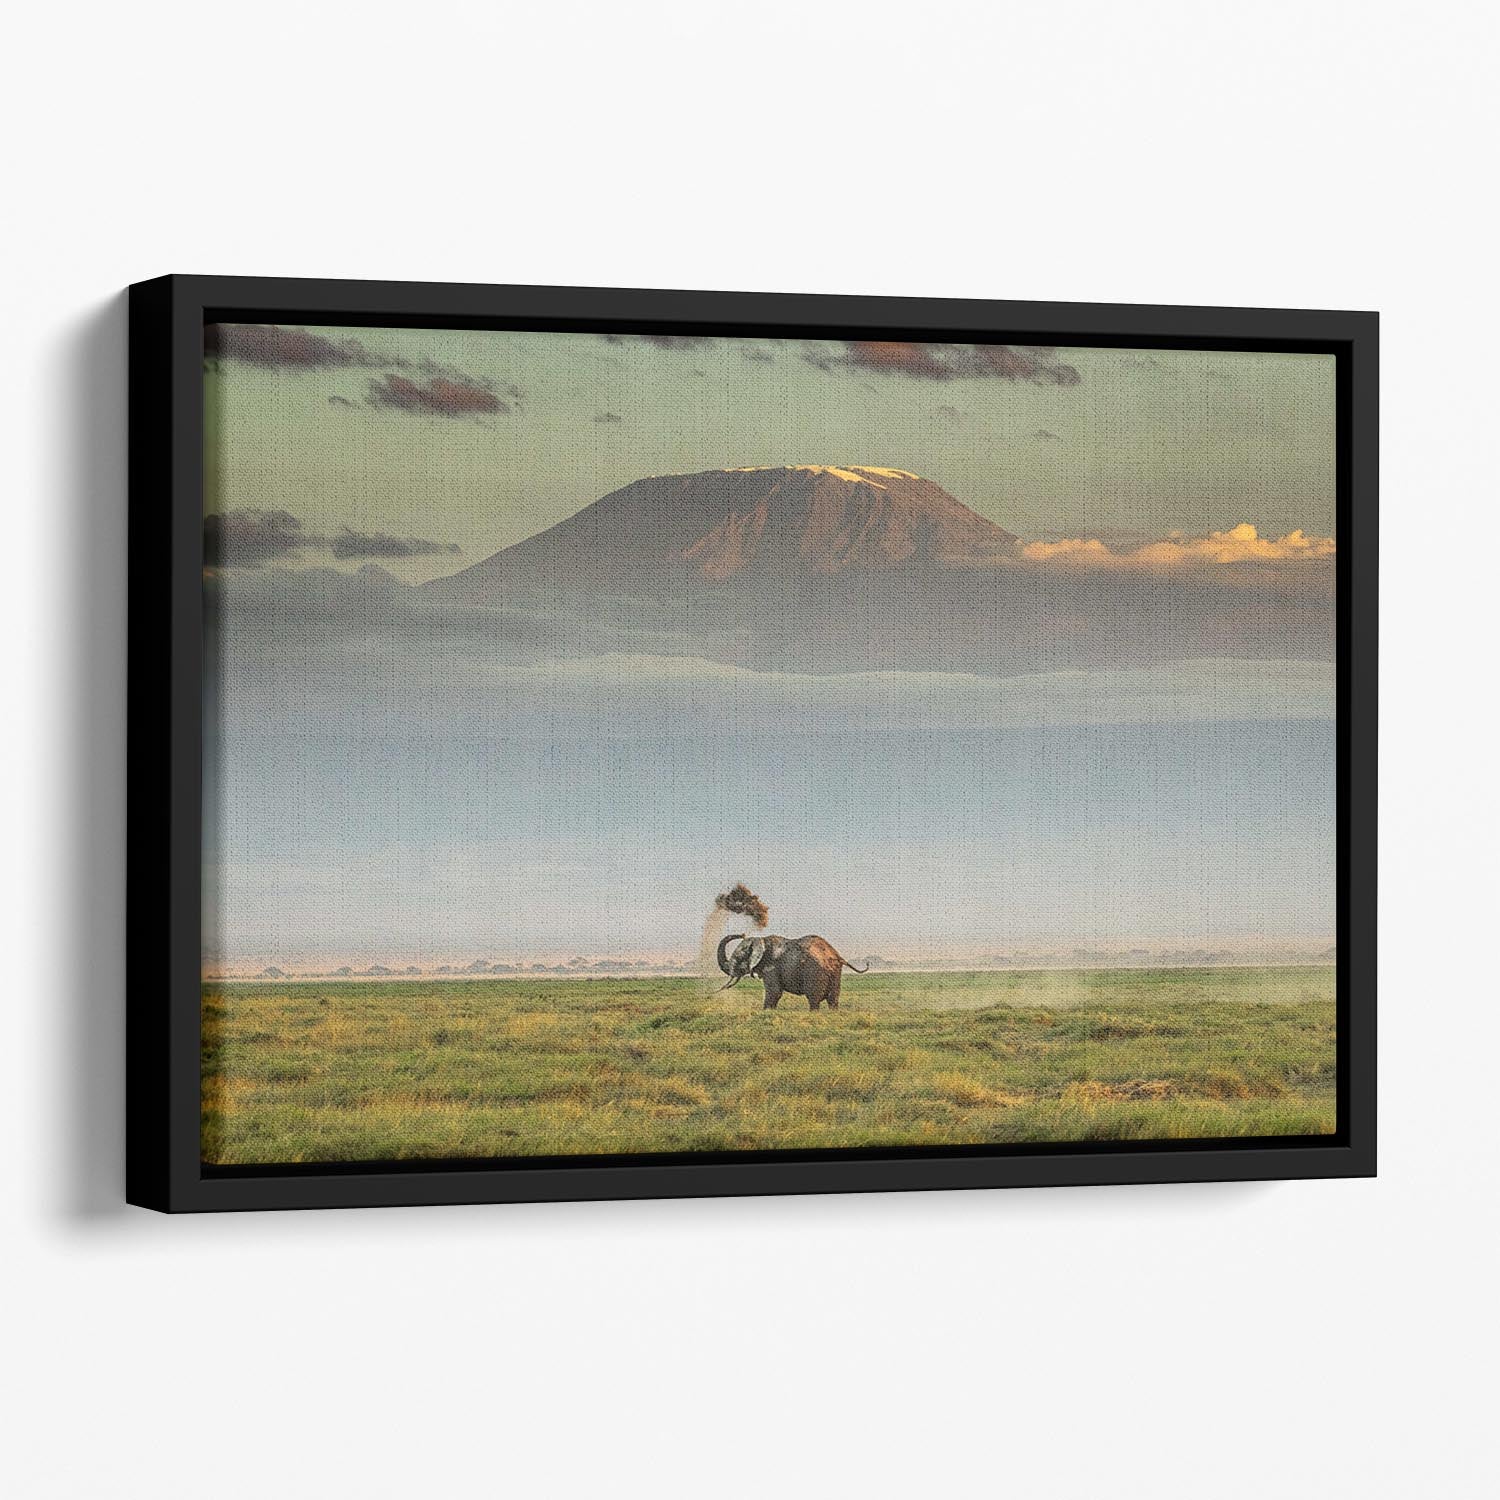 An Elephant Playing In The Dirt Floating Framed Canvas - Canvas Art Rocks - 1